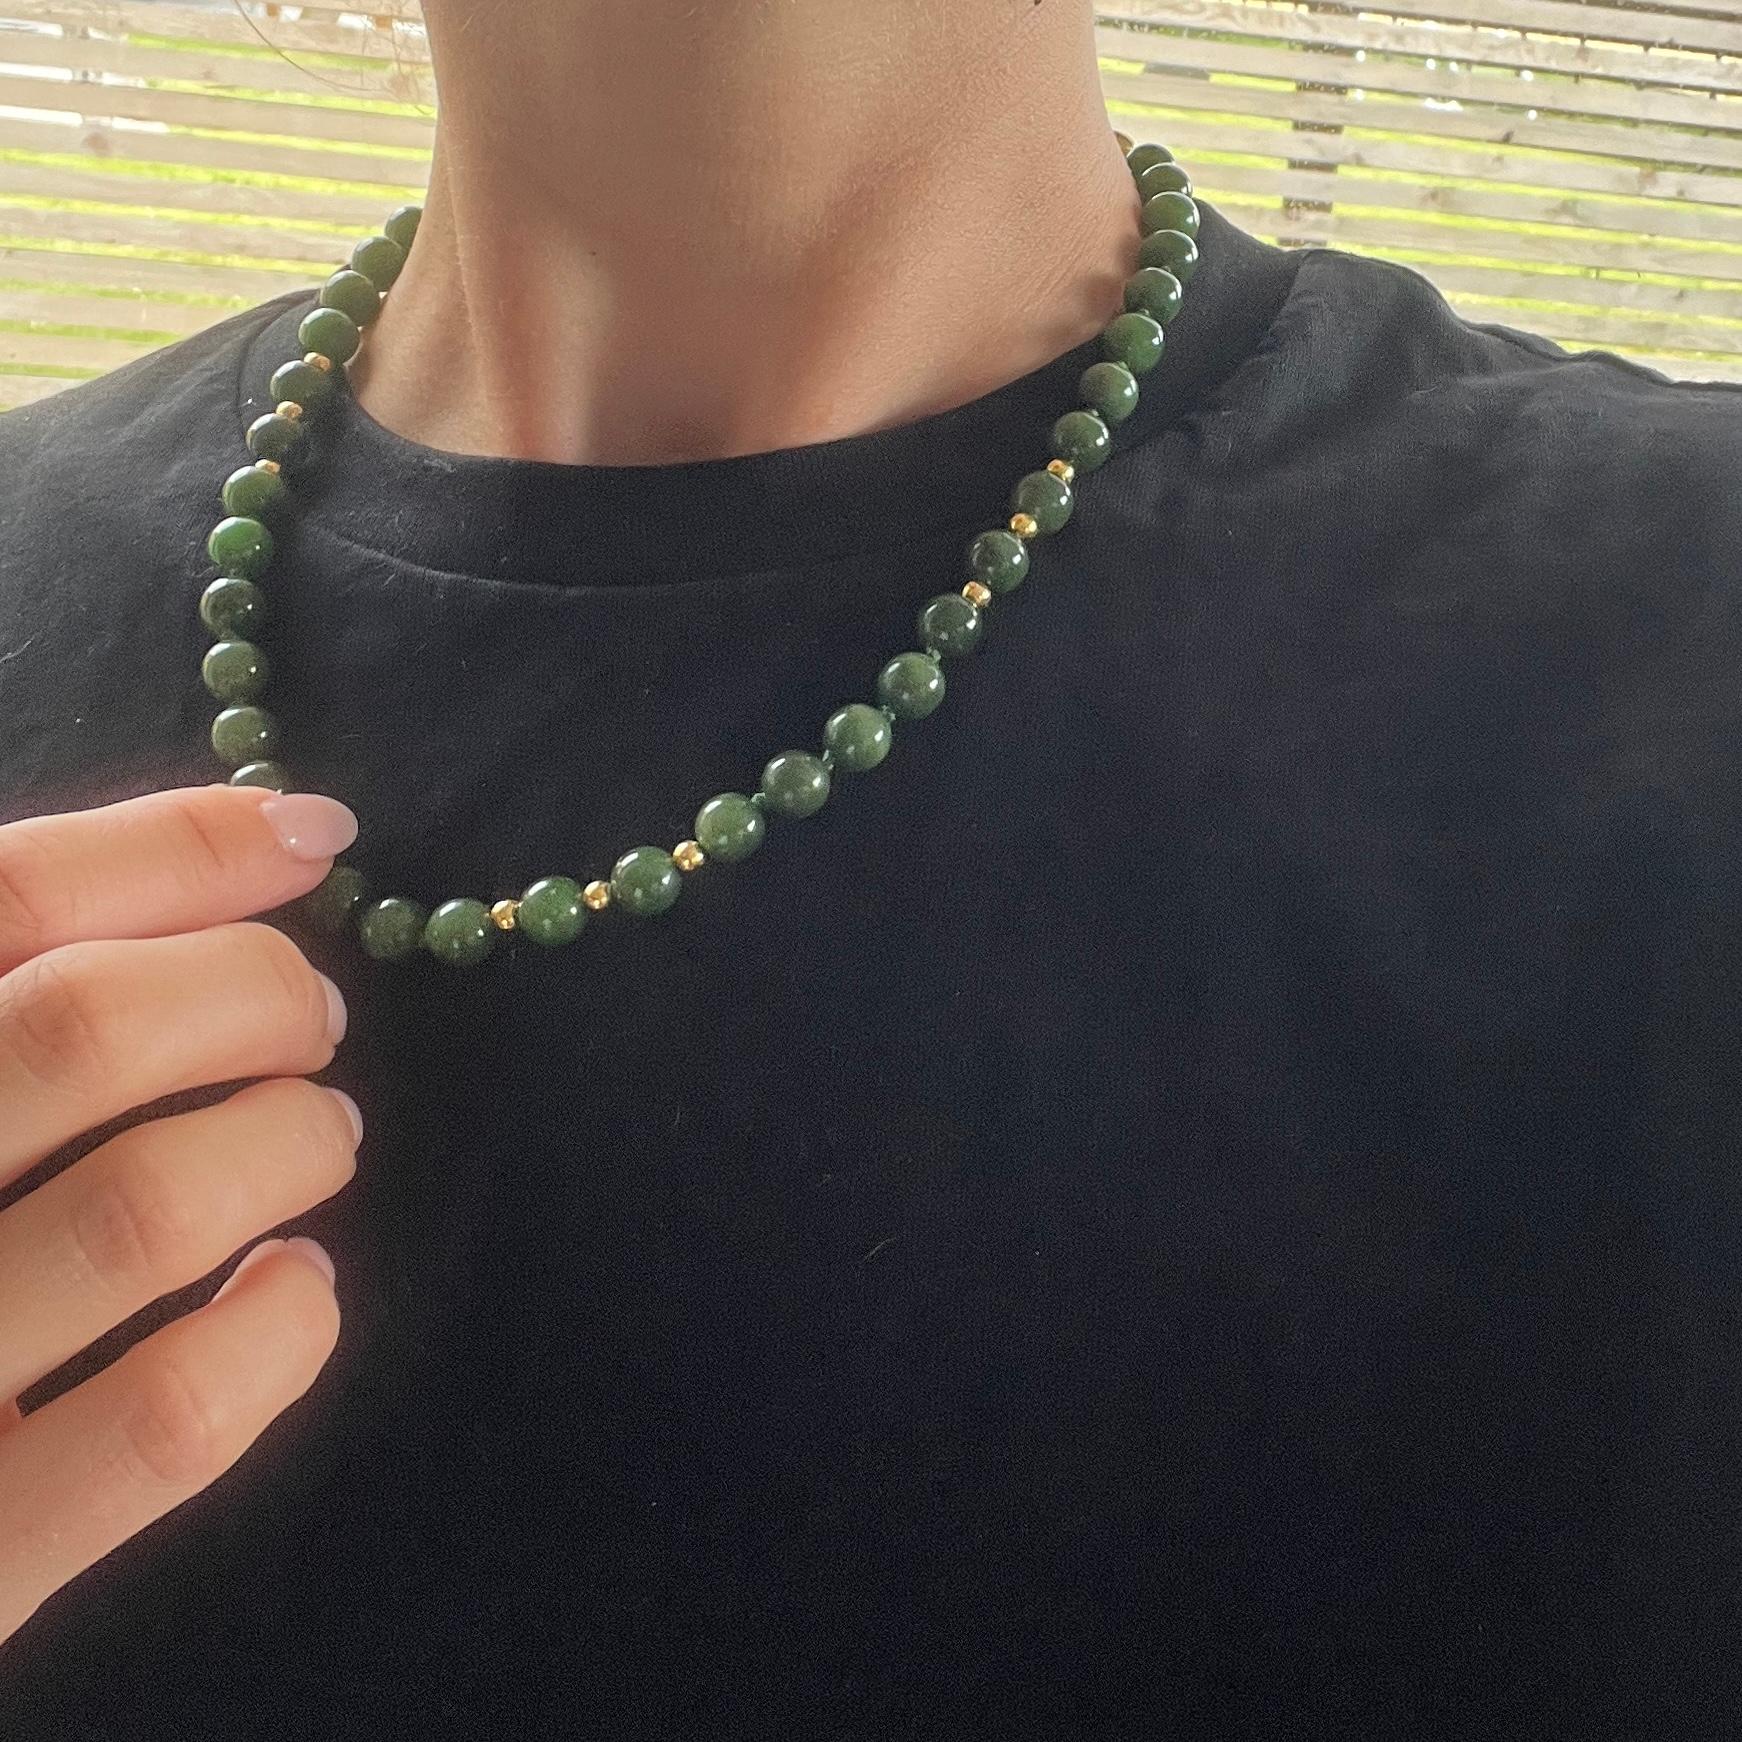 The glossy Jade beads are beautiful broken up with smaller 9 carat gold beads in-between them. 

Length: 45cm

Weight: 41.1g